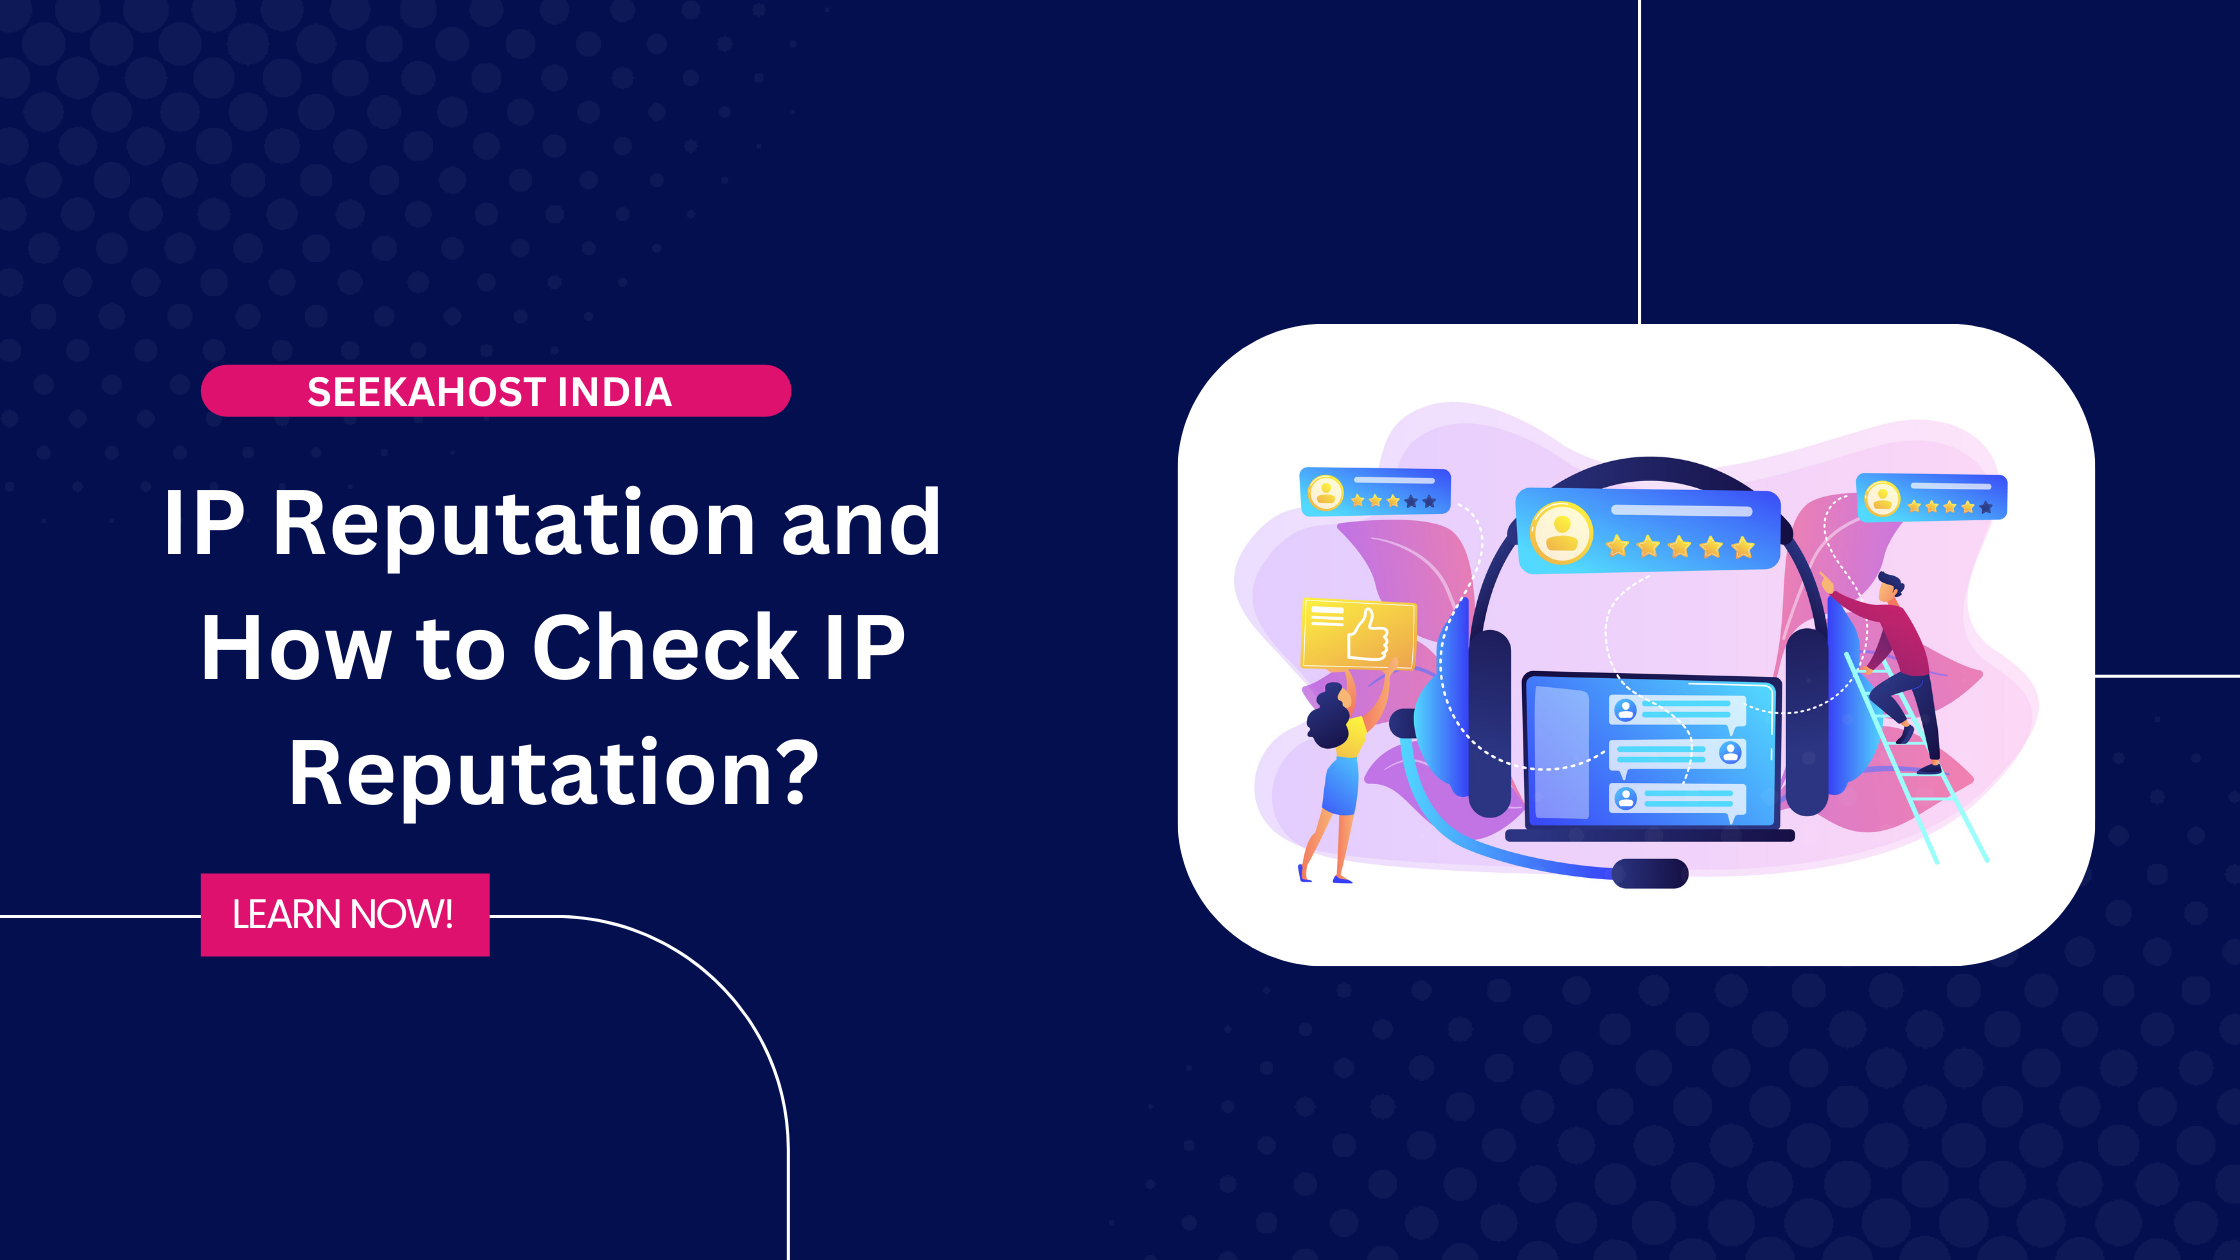 IP Reputation and How to Check IP Reputation